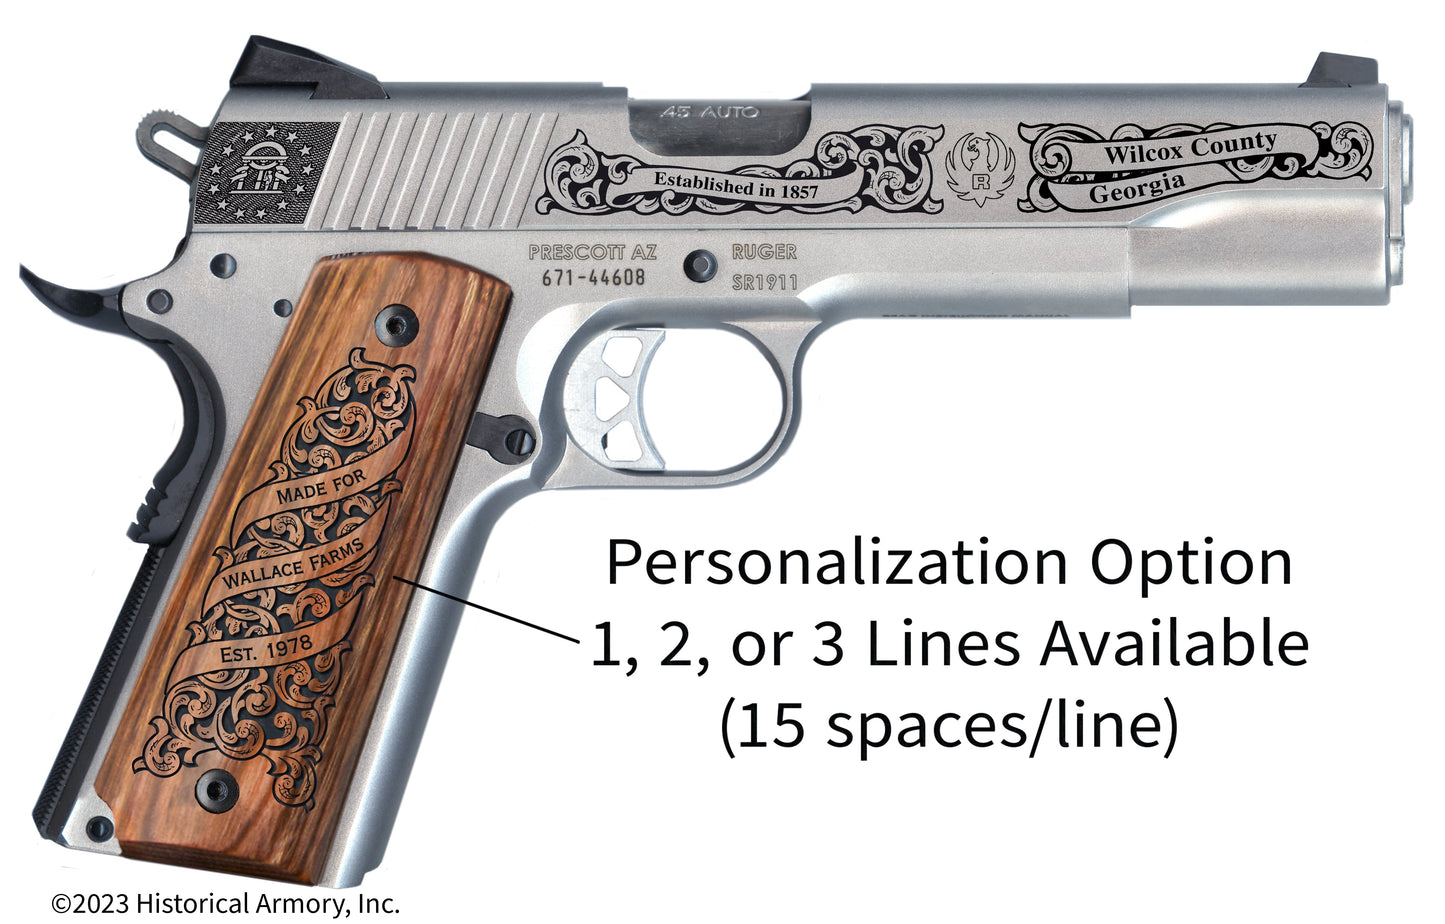 Wilcox County Georgia Personalized Engraved .45 Auto Ruger 1911